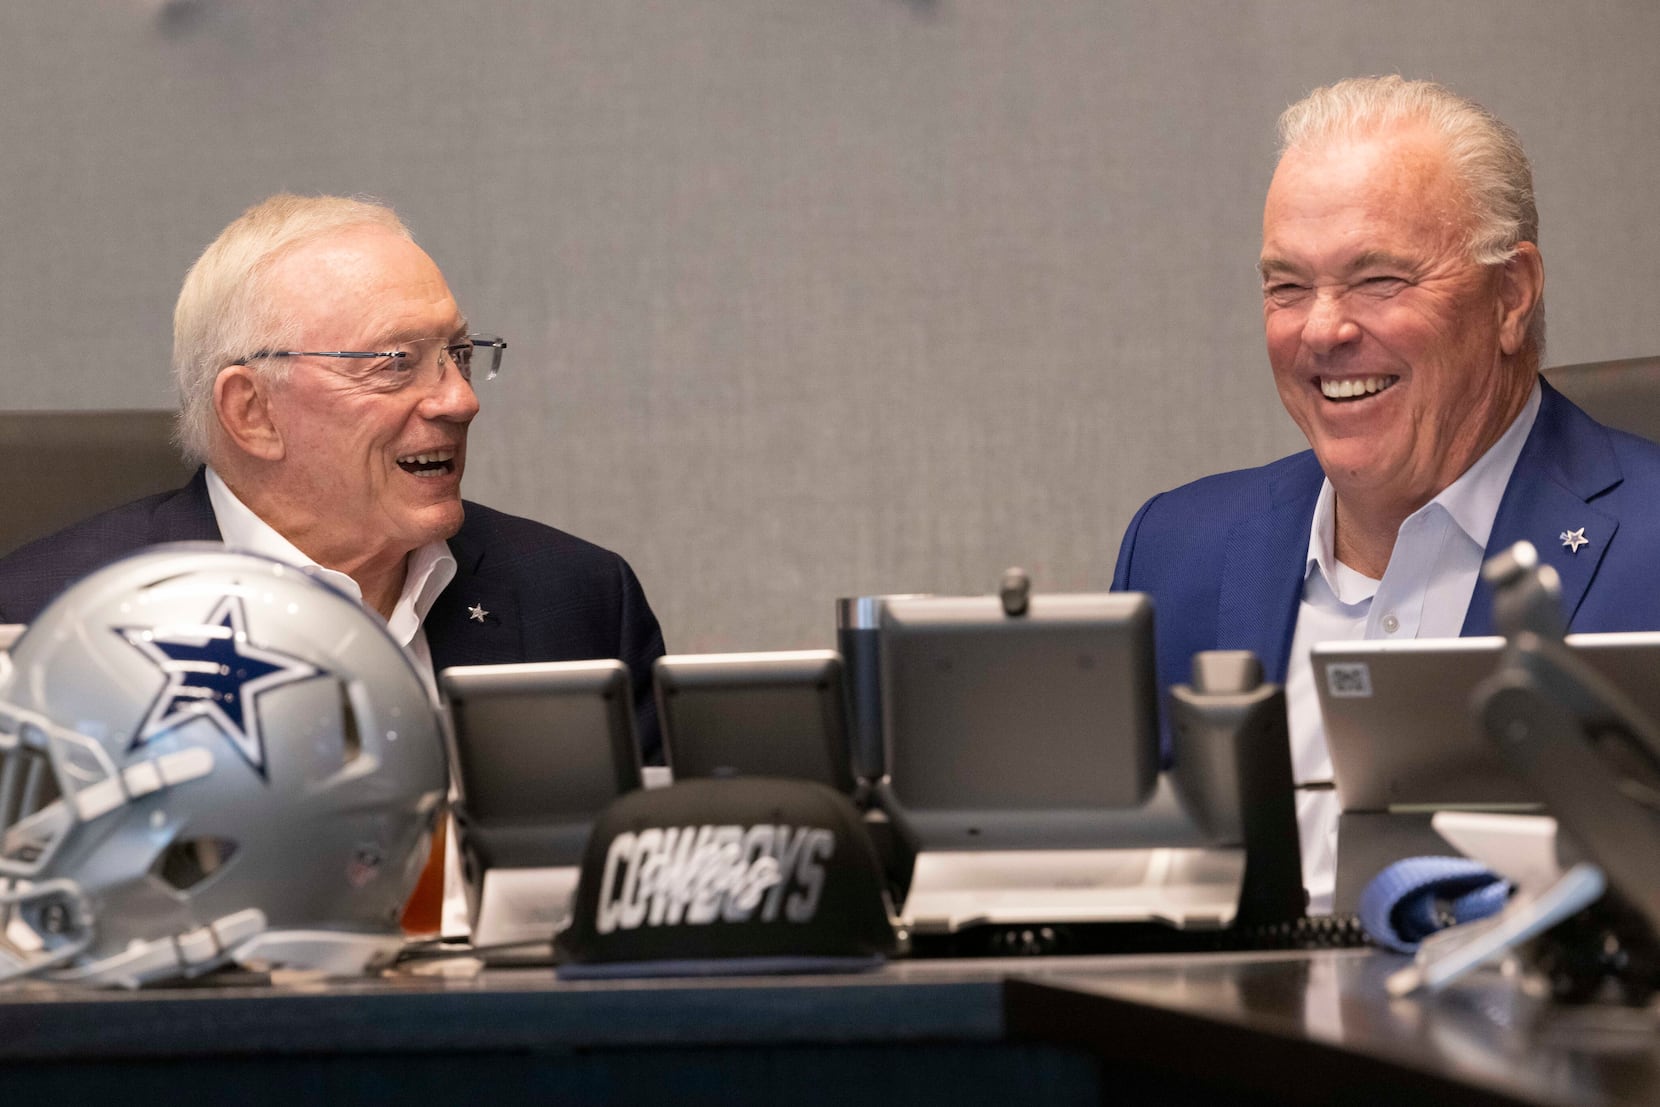 Dallas Cowboys 2022 NFL Draft class: Here's who they picked